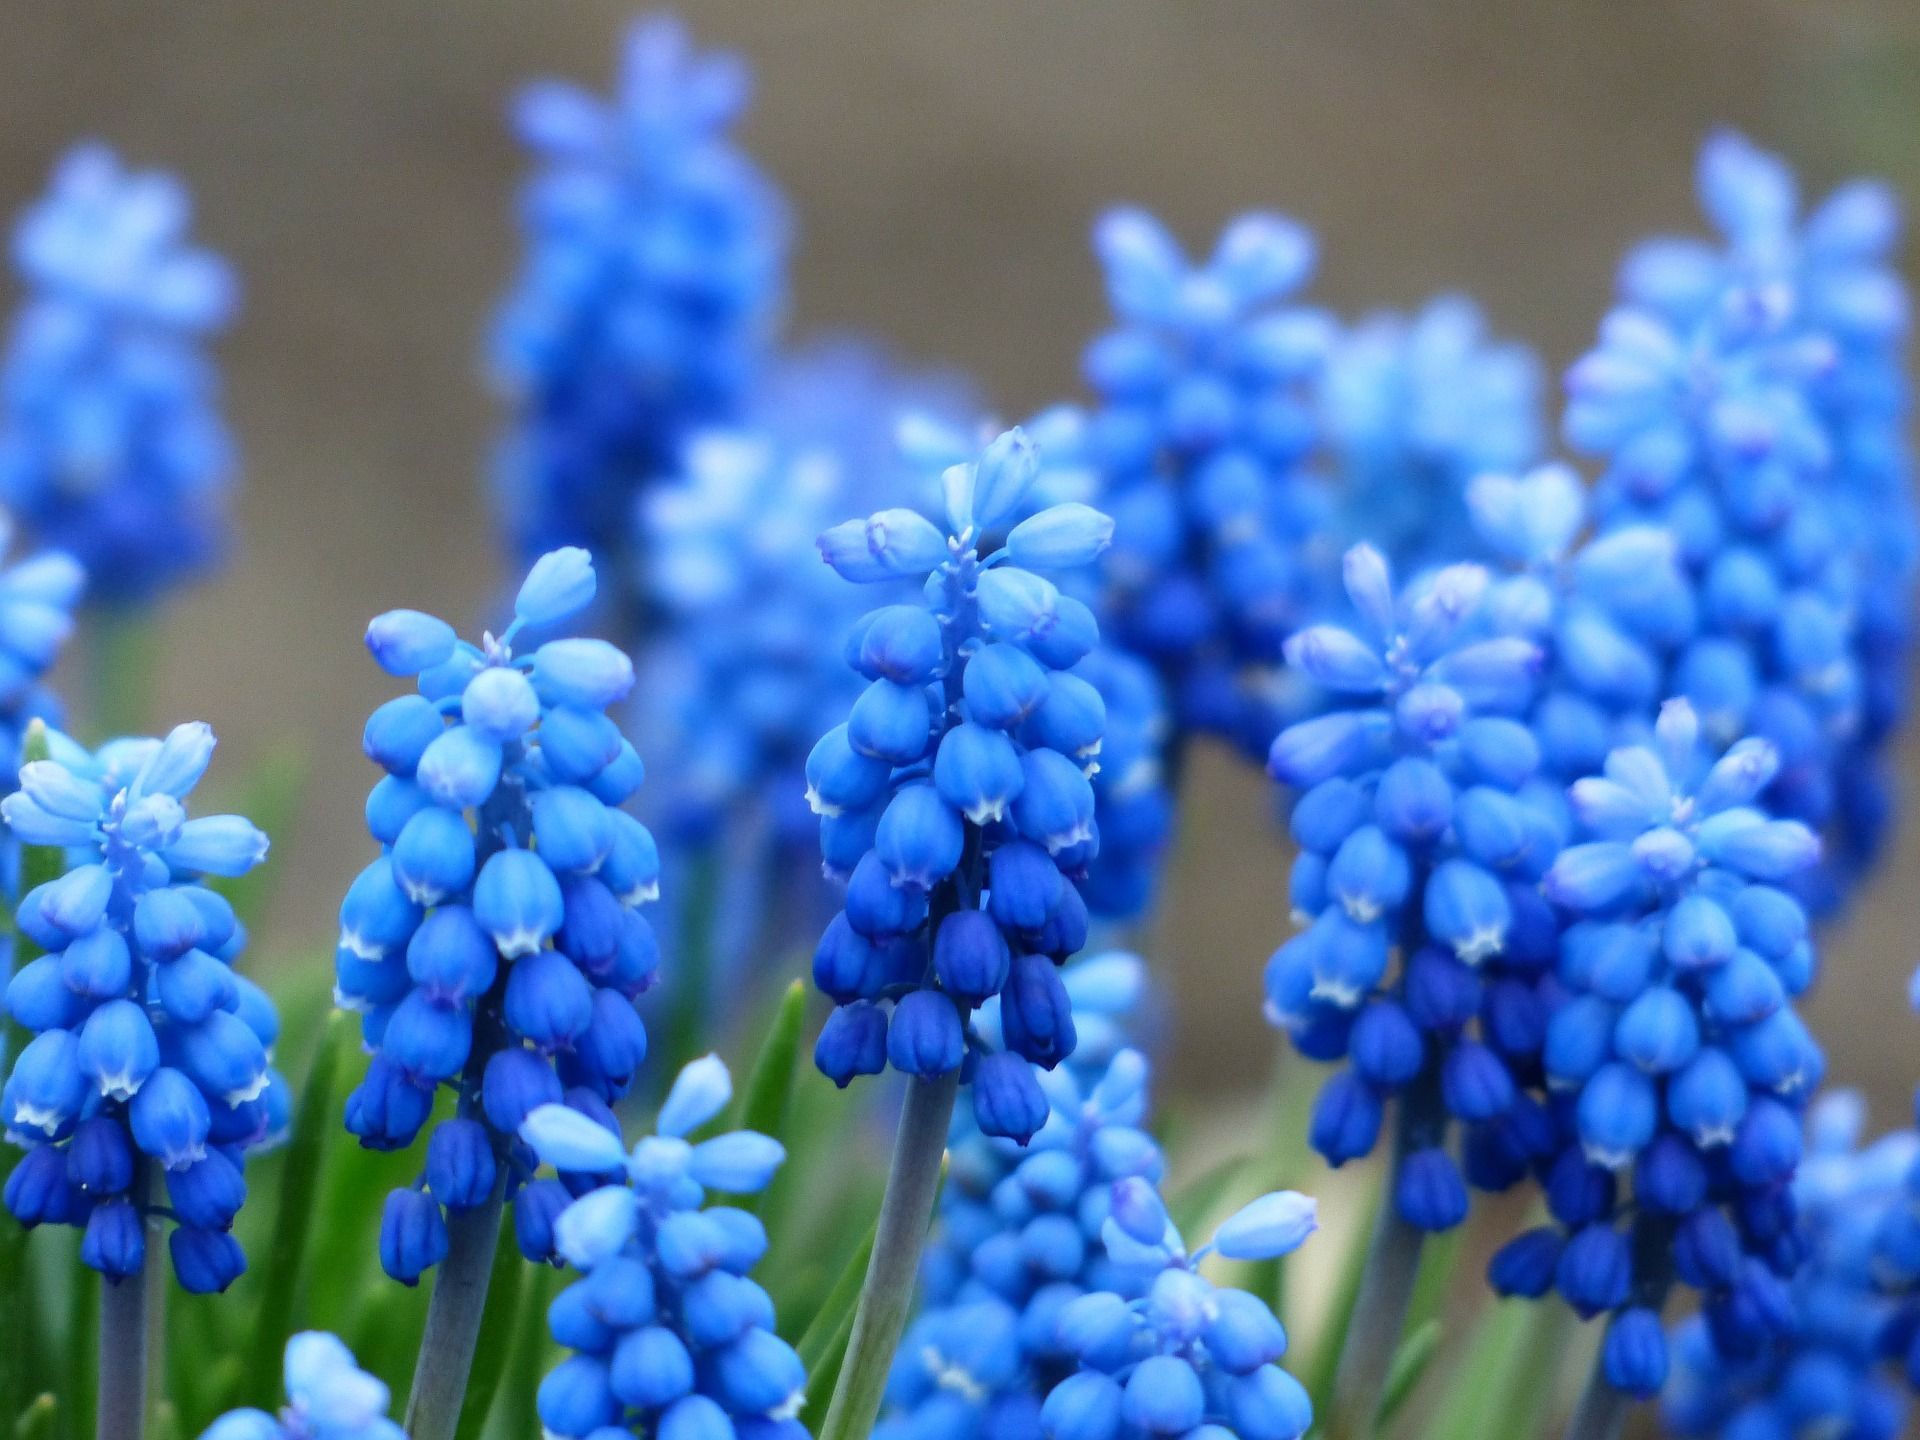 Blue Muscari Spring Flowers Wallpaper | Free High Definition ...